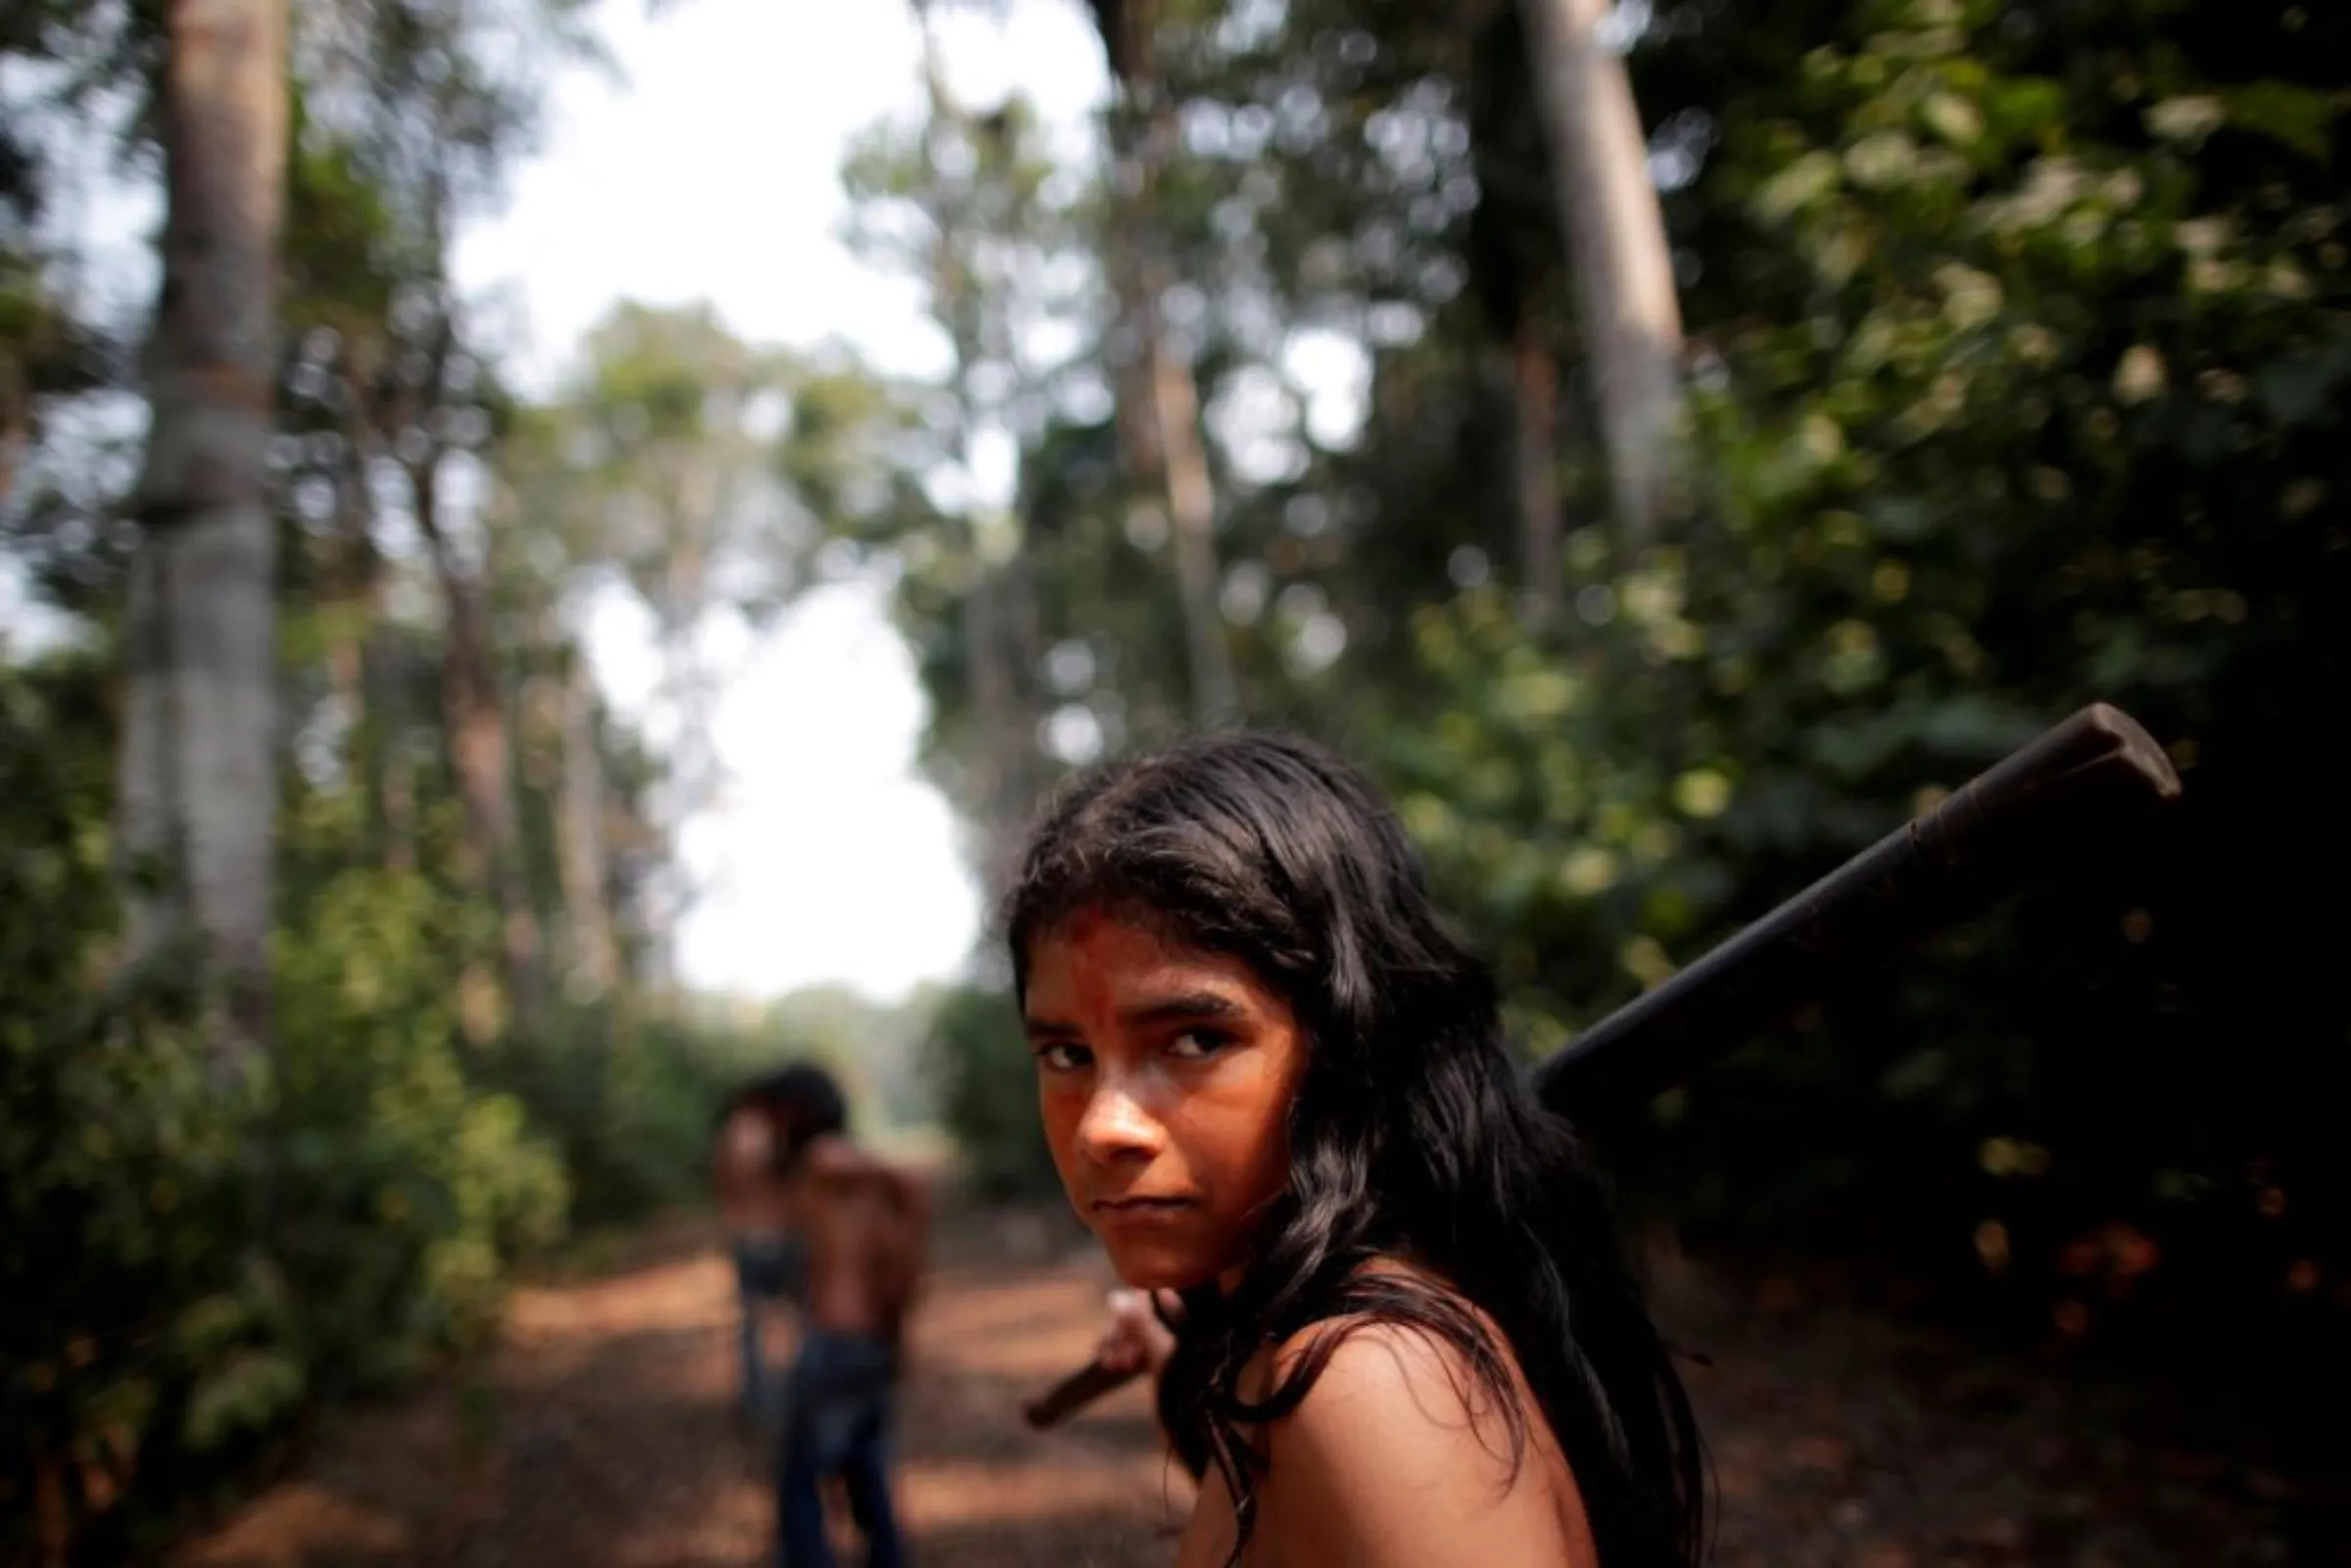 A boy from the Indigenous Mura tribe, reacts in front of a deforested area in nondemarcated indigenous land inside the Amazon rainforest, near Humaita, Amazonas State, Brazil, August 20, 2019. REUTERS/Ueslei Marcelino